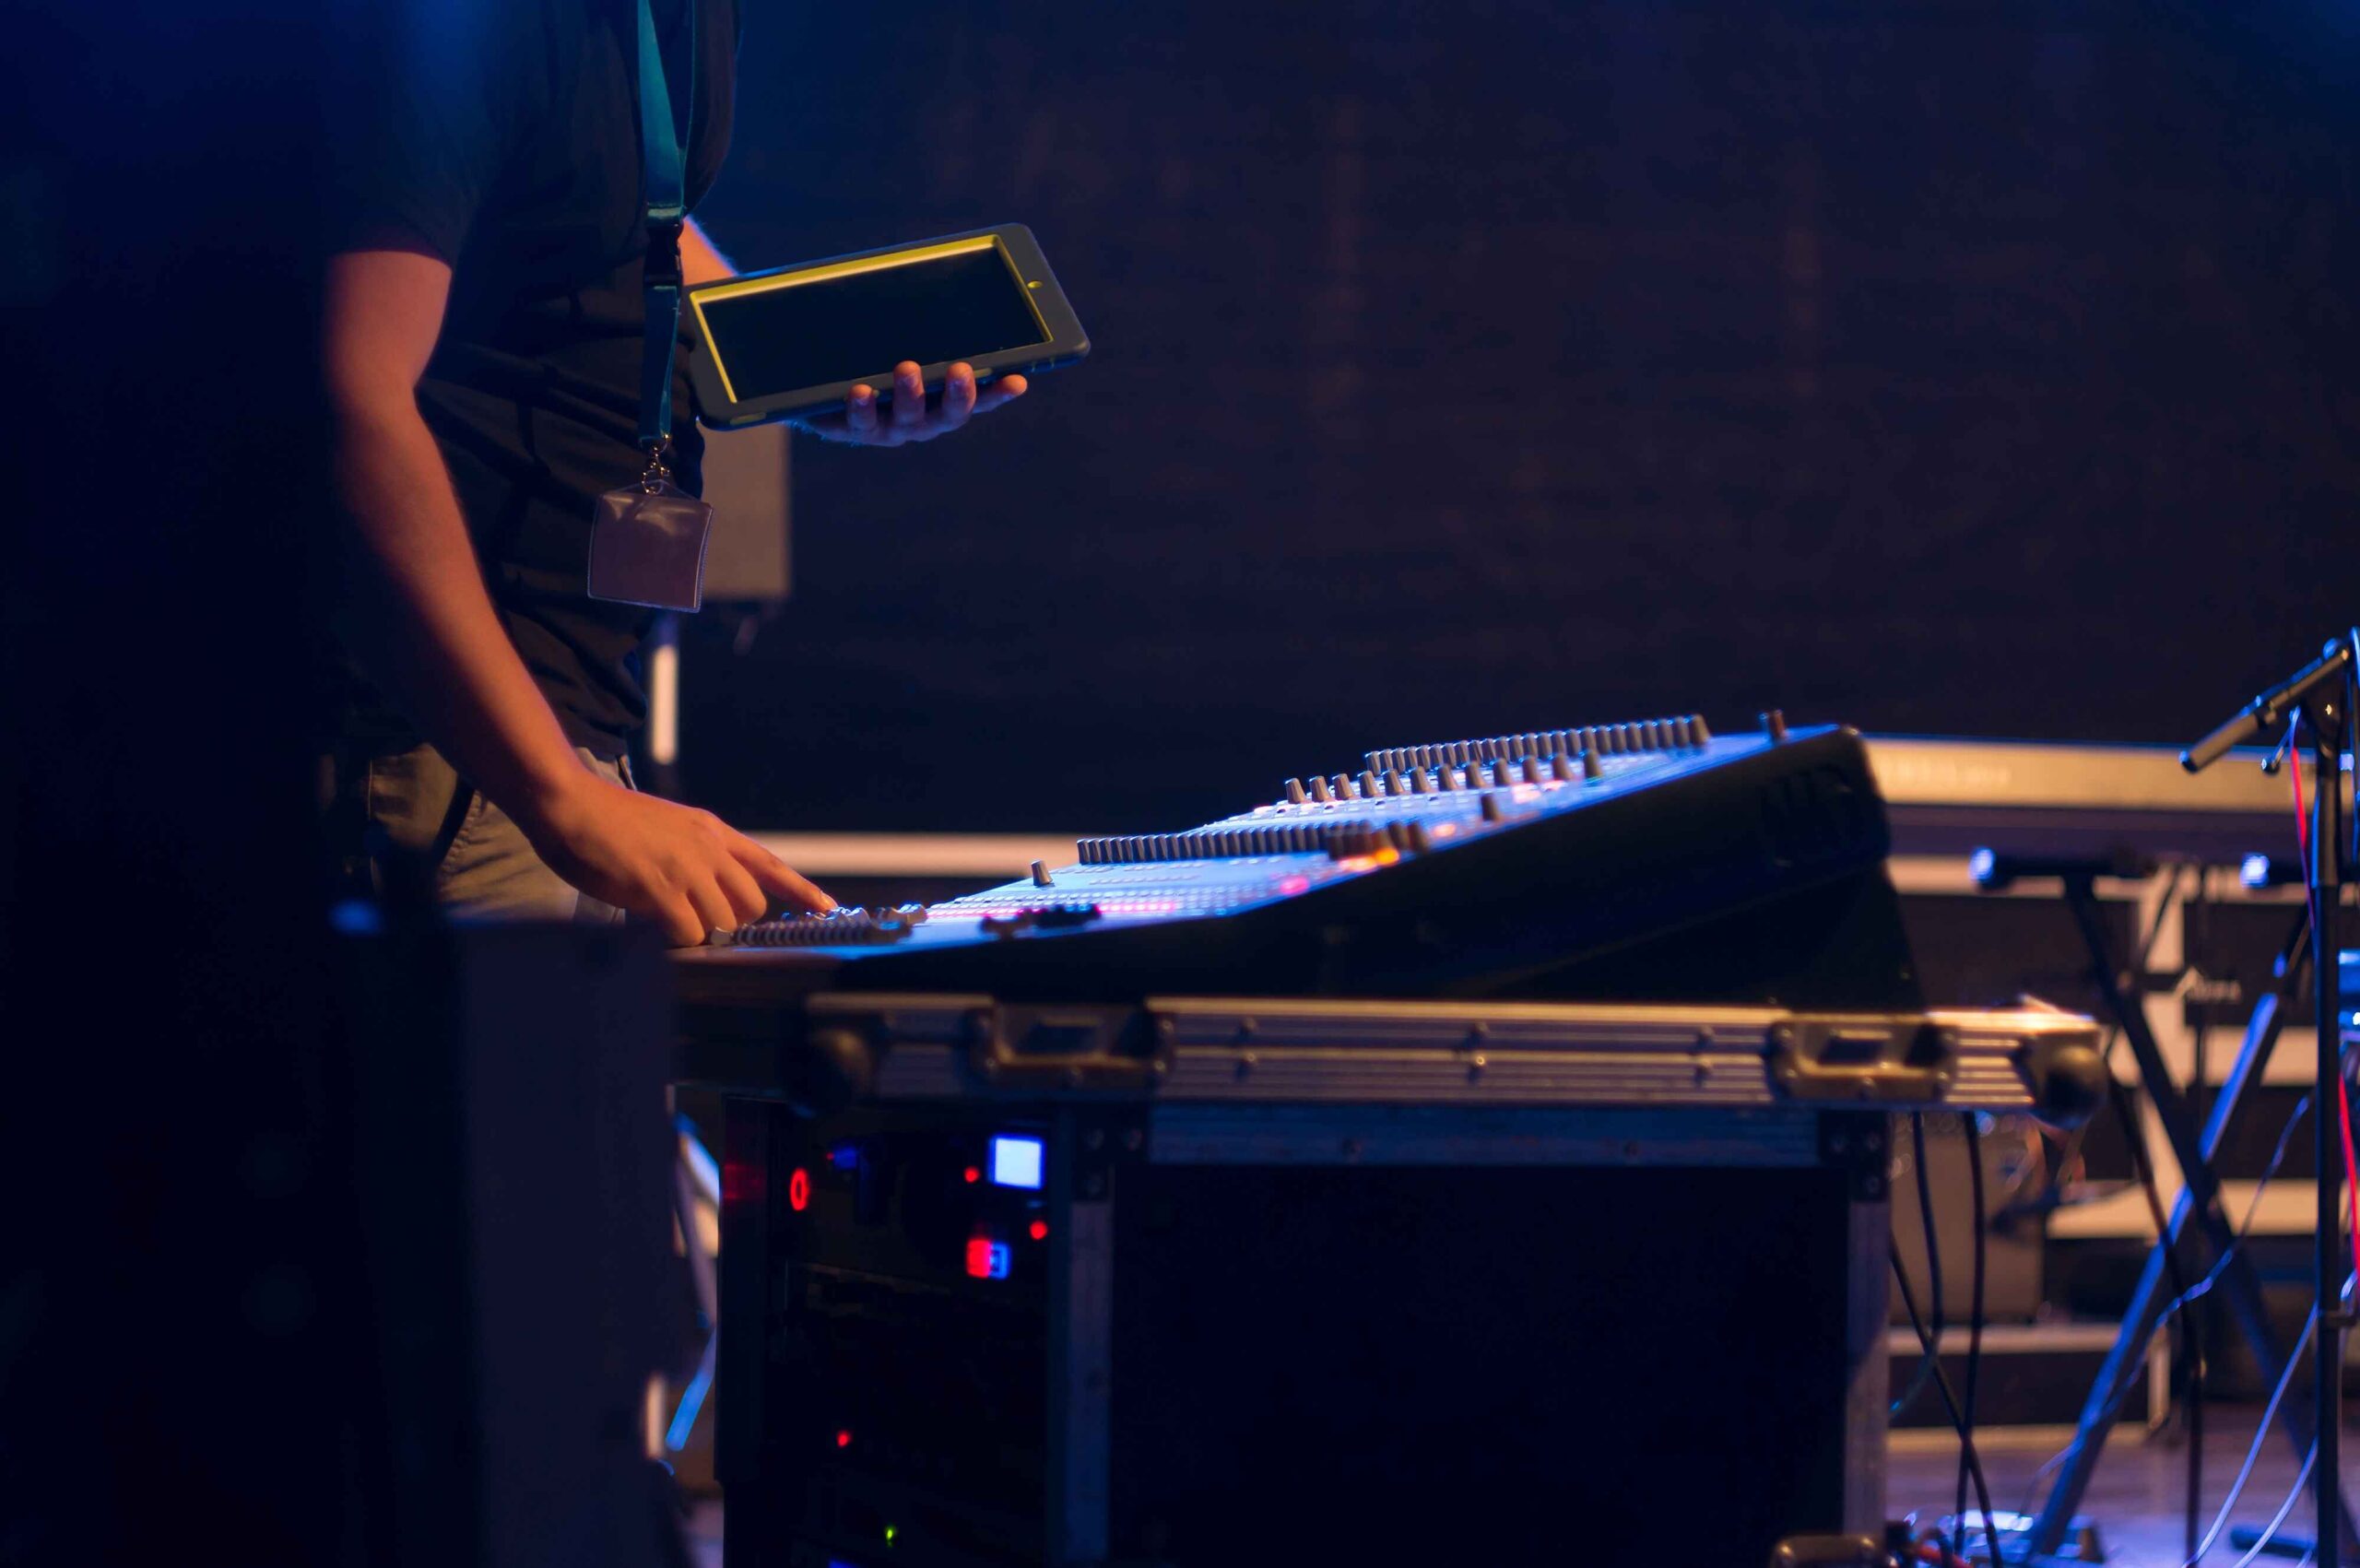 AV tech operating a sound mixing console with a tablet in hand, adjusting settings during a live event.